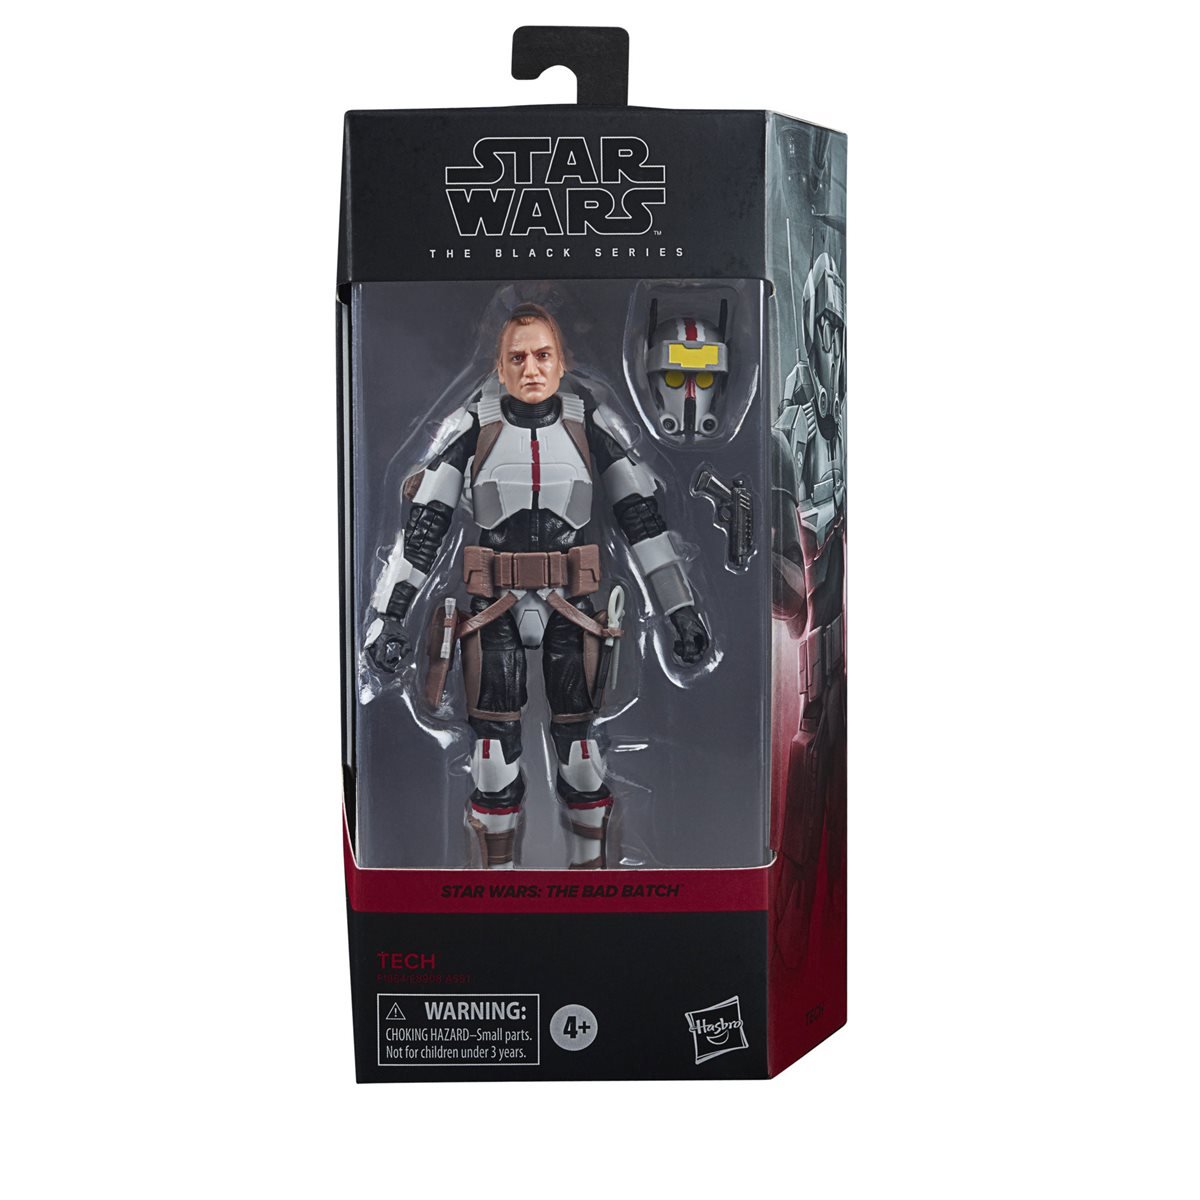 Hasbro Star Wars The Black Series The Bad Batch Tech figure in box packaging